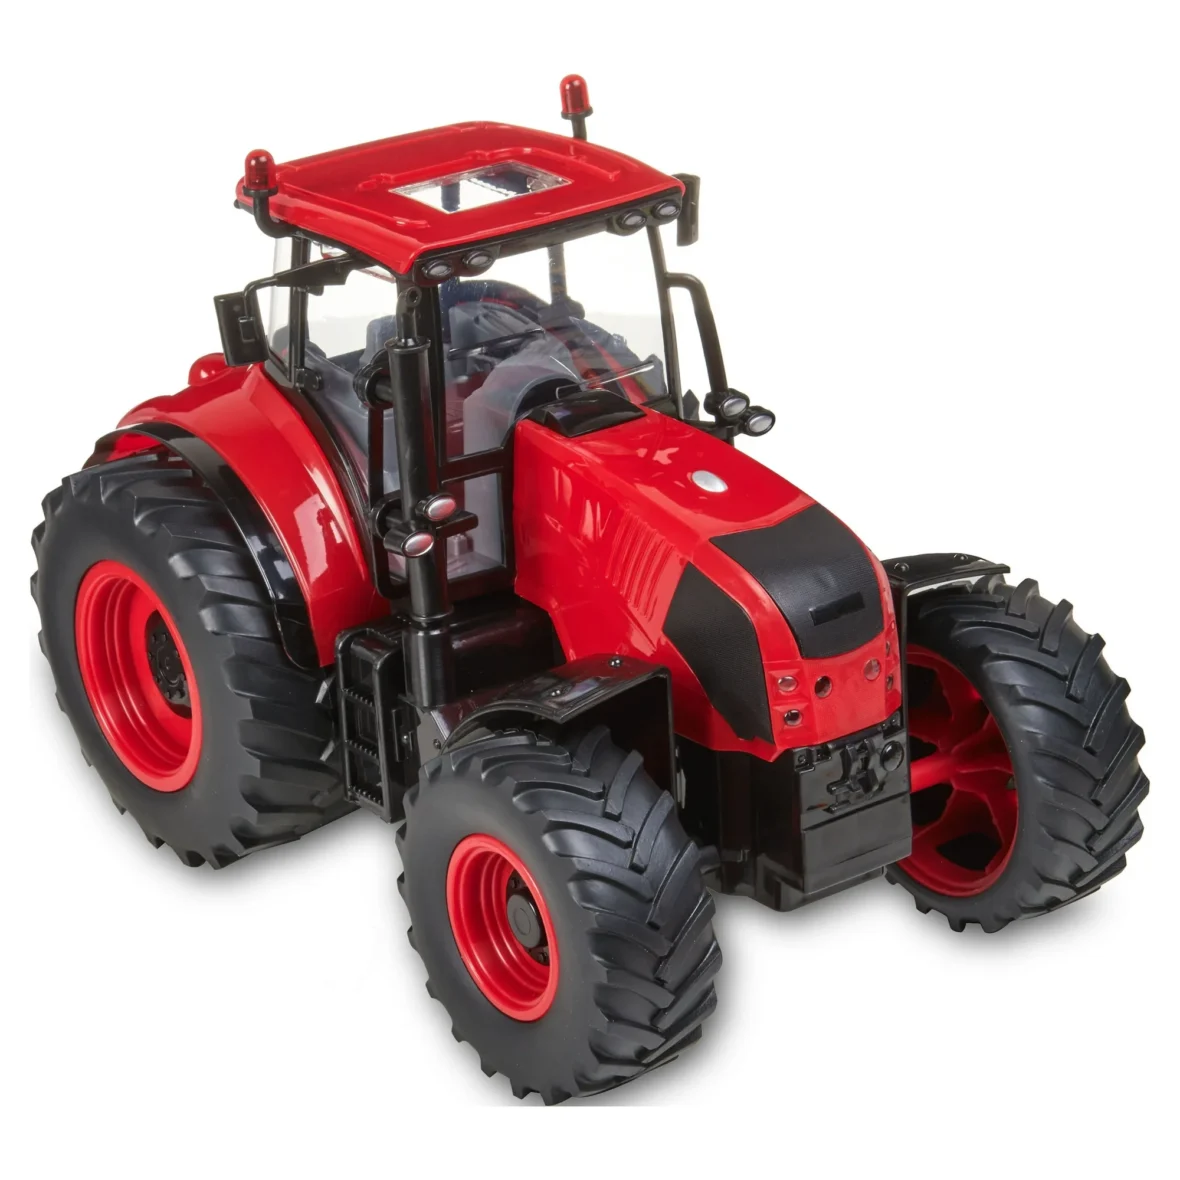 Adventure Force Tractor, Red